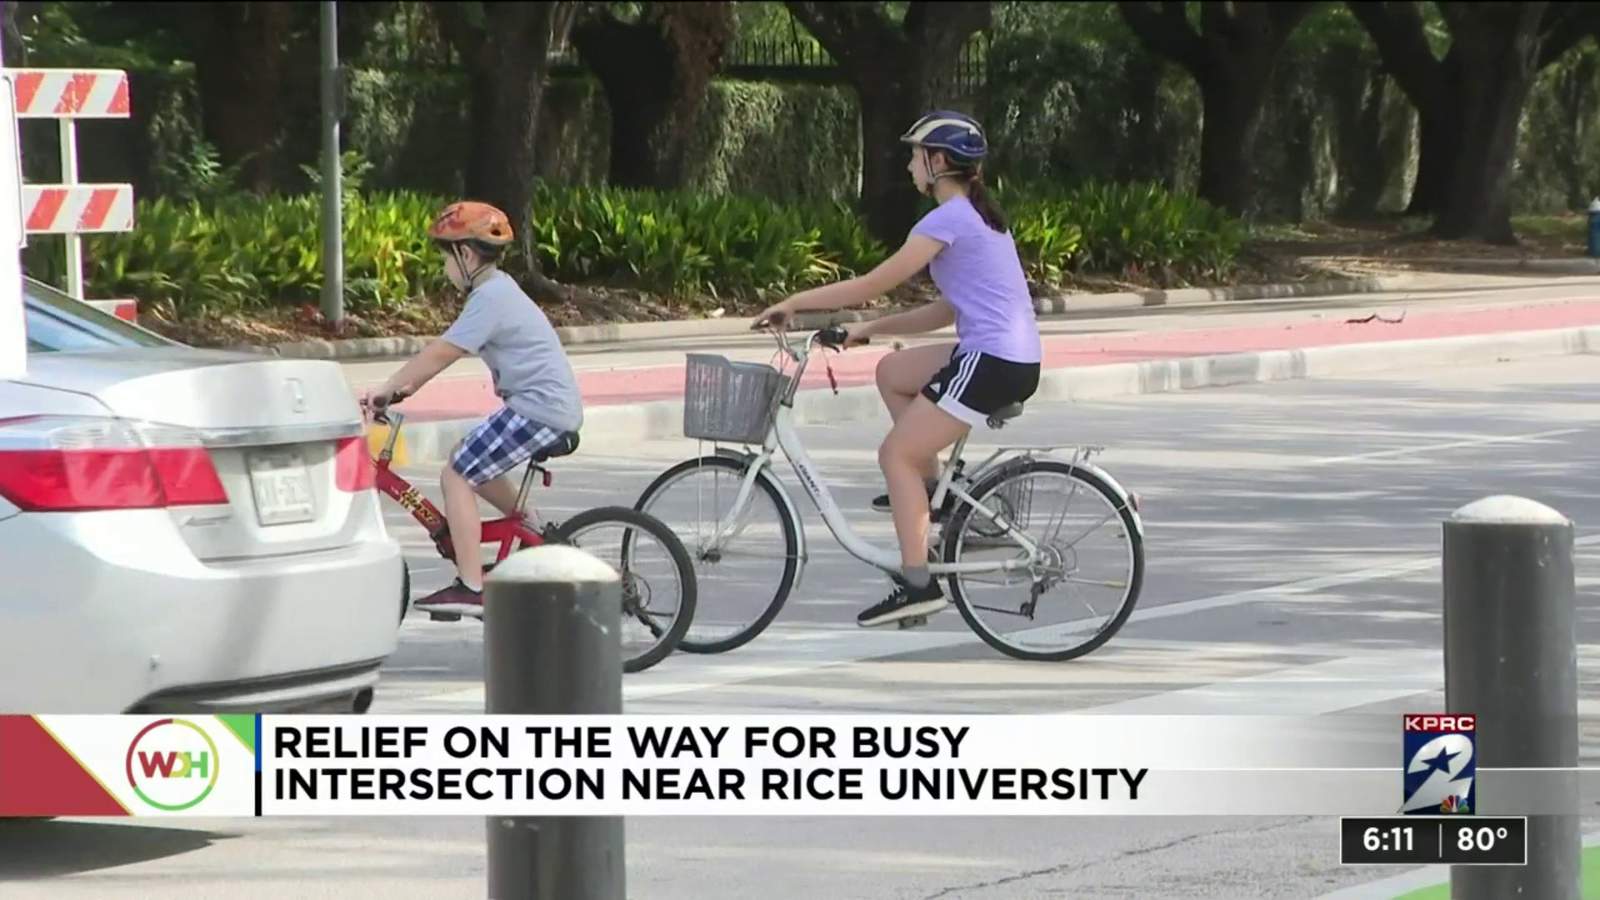 Call to action answered to fix dangerous intersection near Rice Univeristy